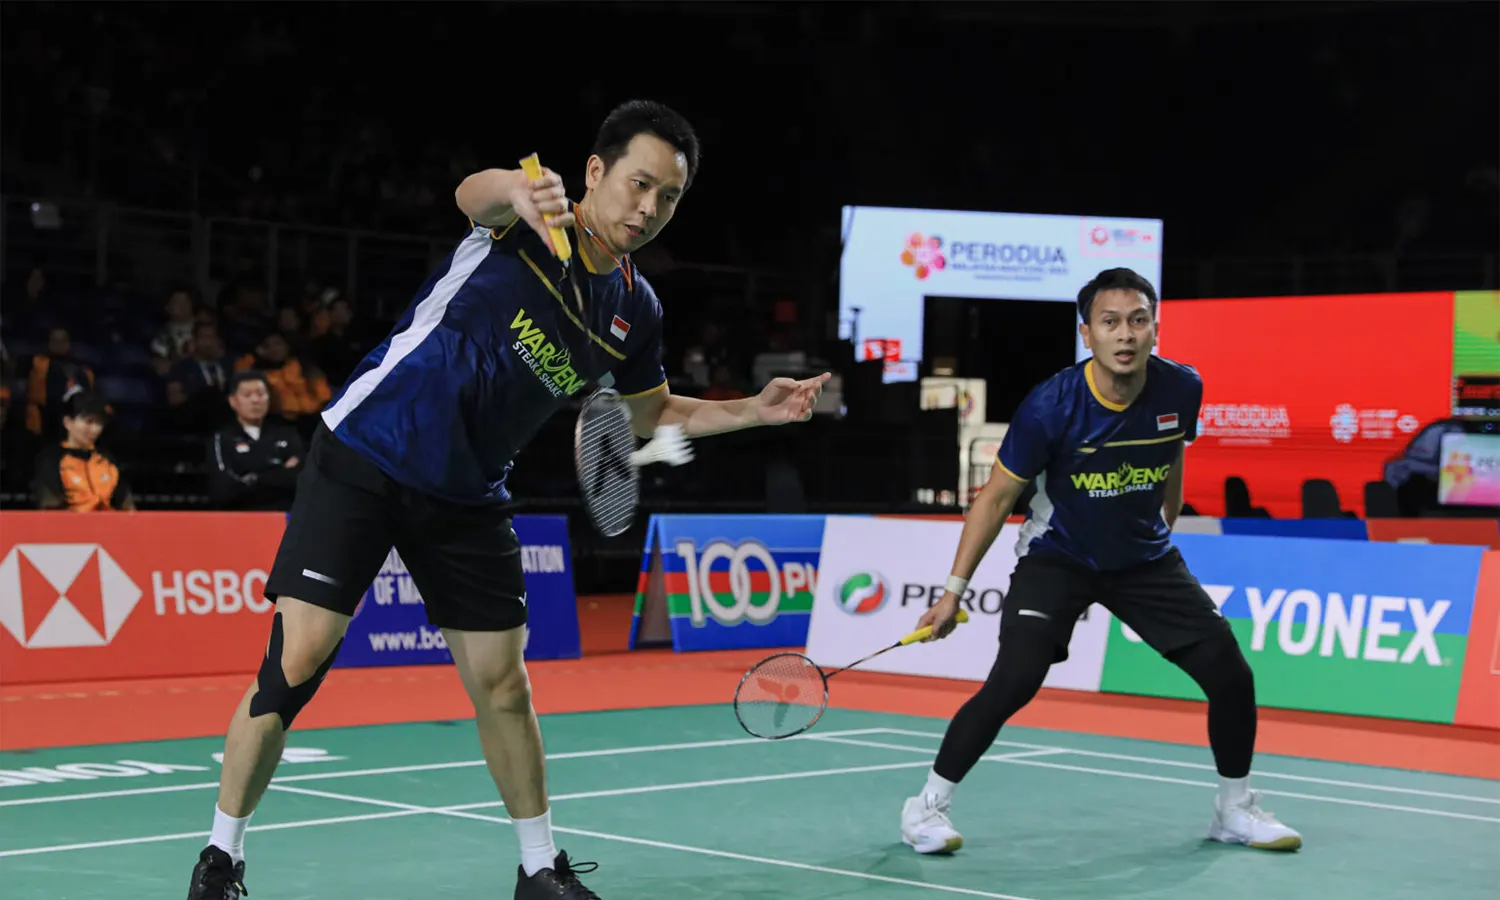 Ahsan-Hendra are the only Indonesian representatives at the 2023 Canada Open